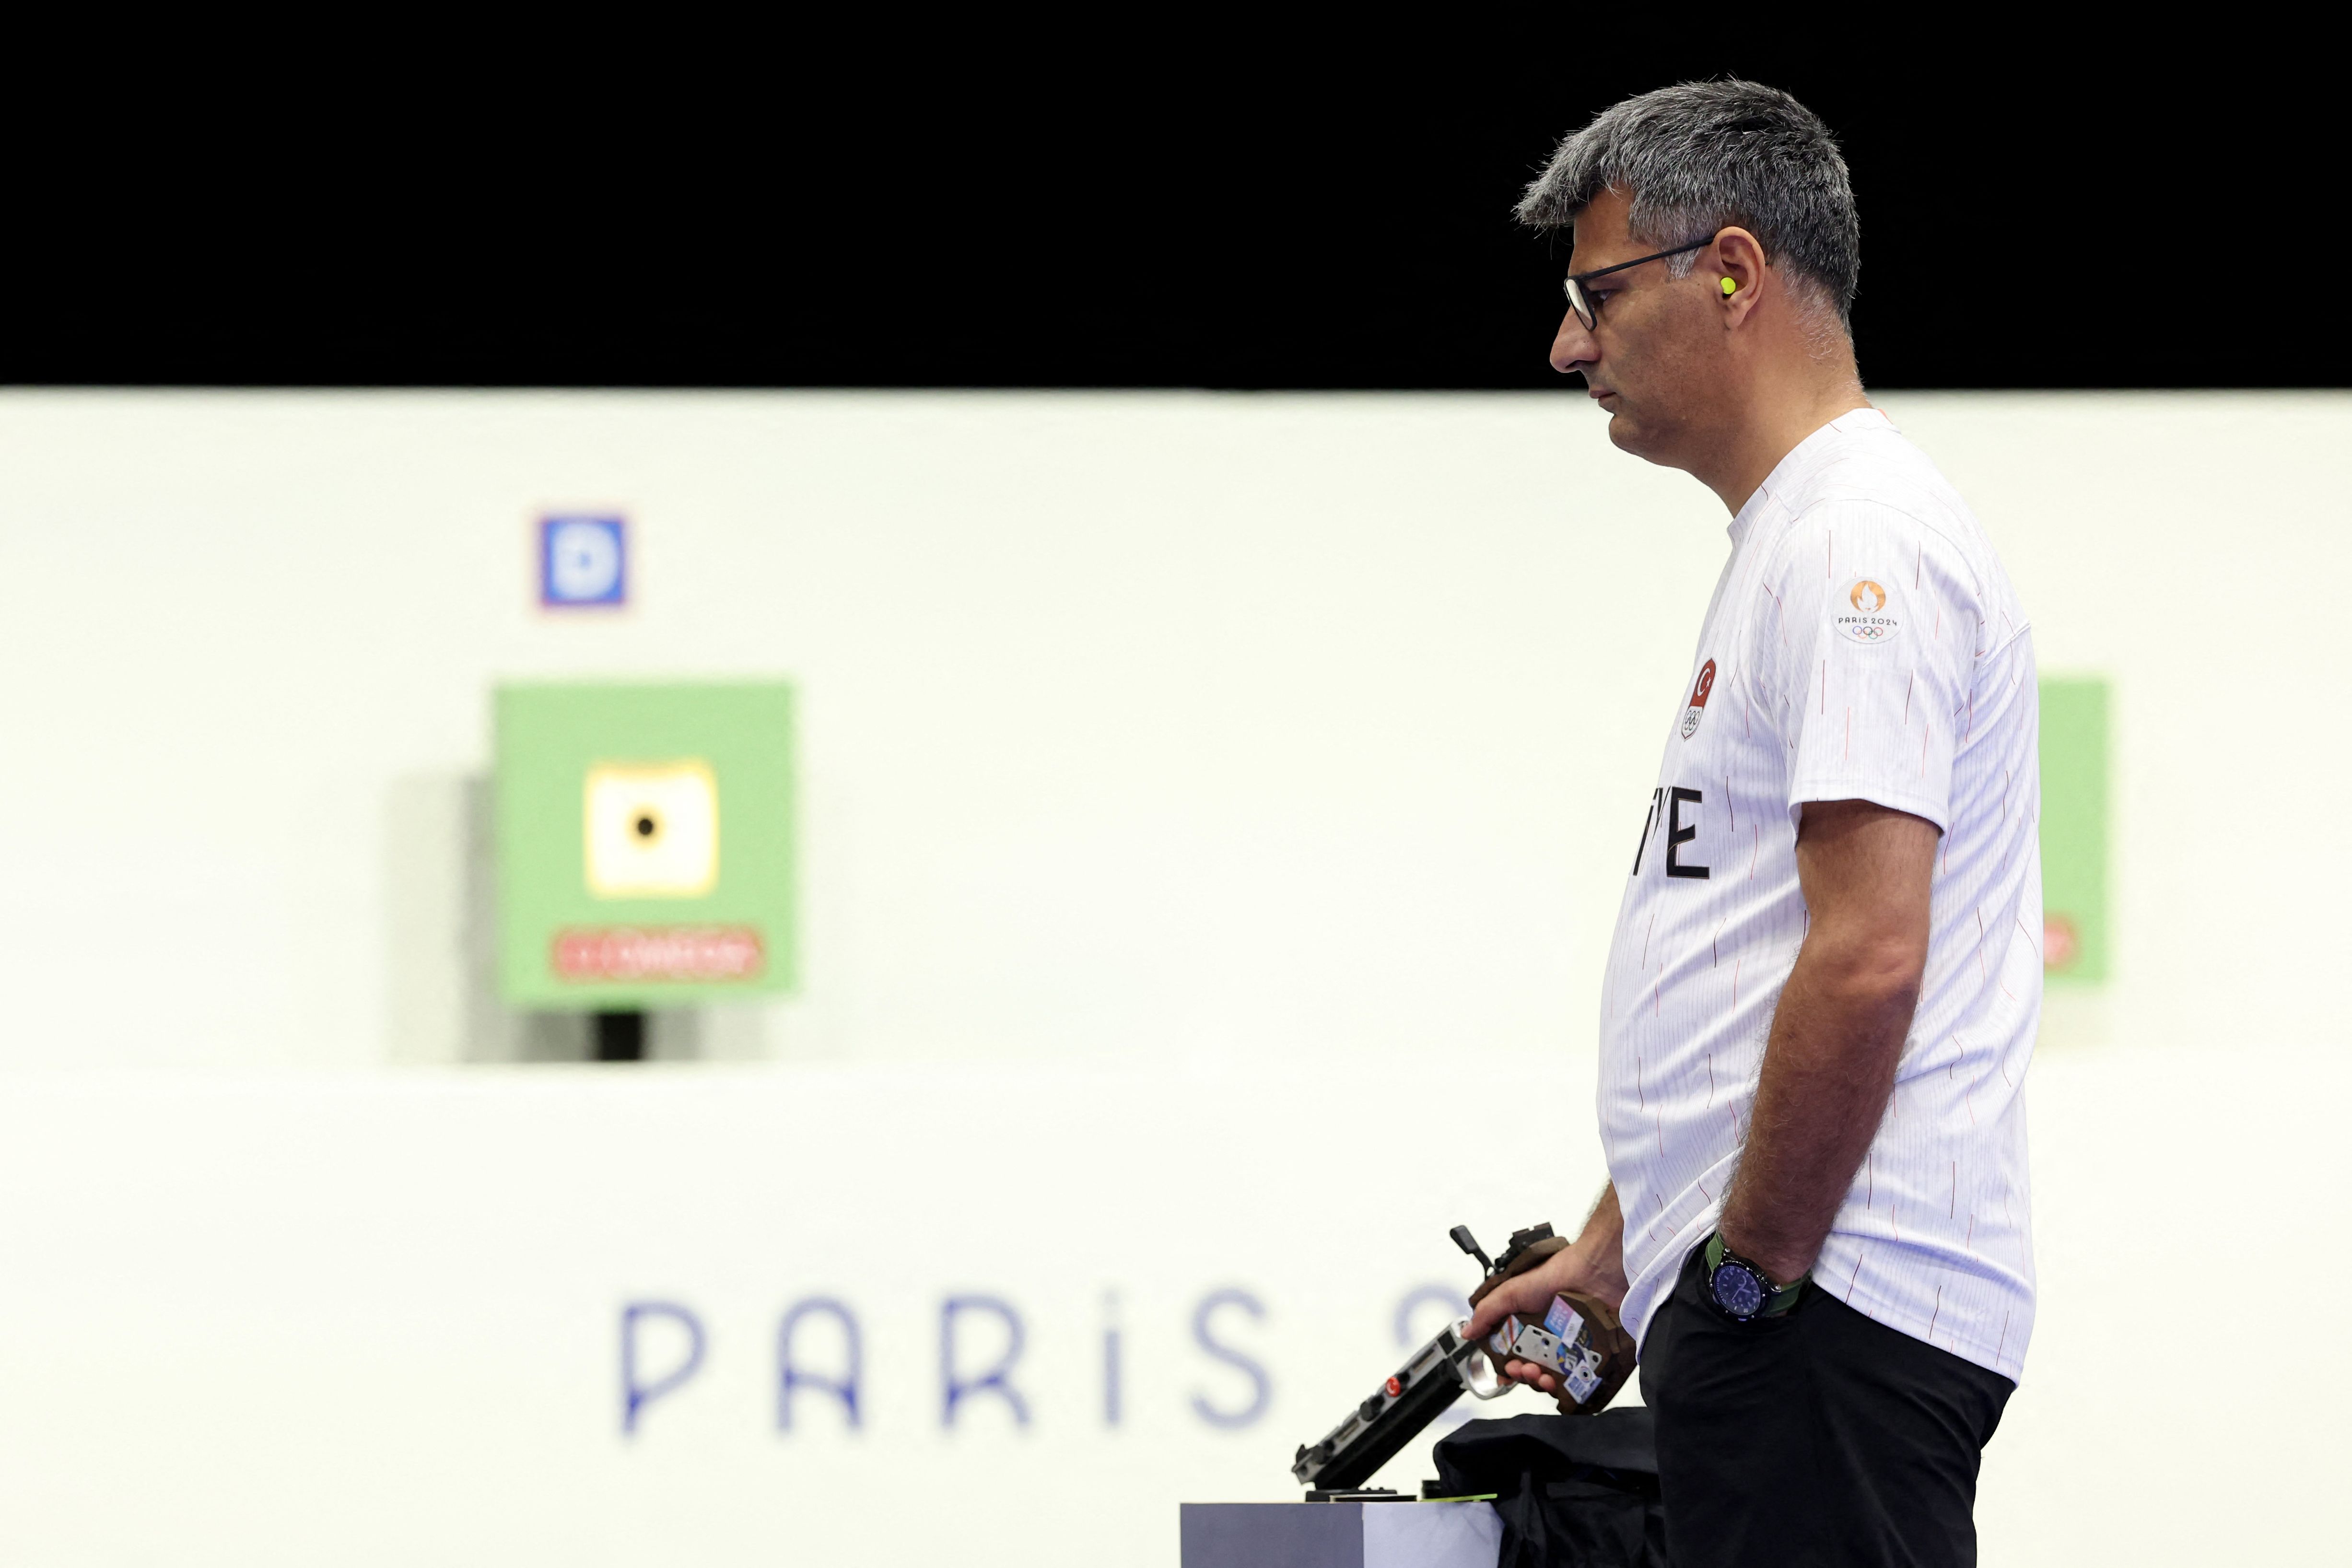 Turkey's Yusuf Dikec competes in the shooting 10m air pistol mixed team gold medal match during the Paris 2024 Olympic Games at Chateauroux Shooting Centre on July 30, 2024. (Photo by Alain JOCARD / AFP)